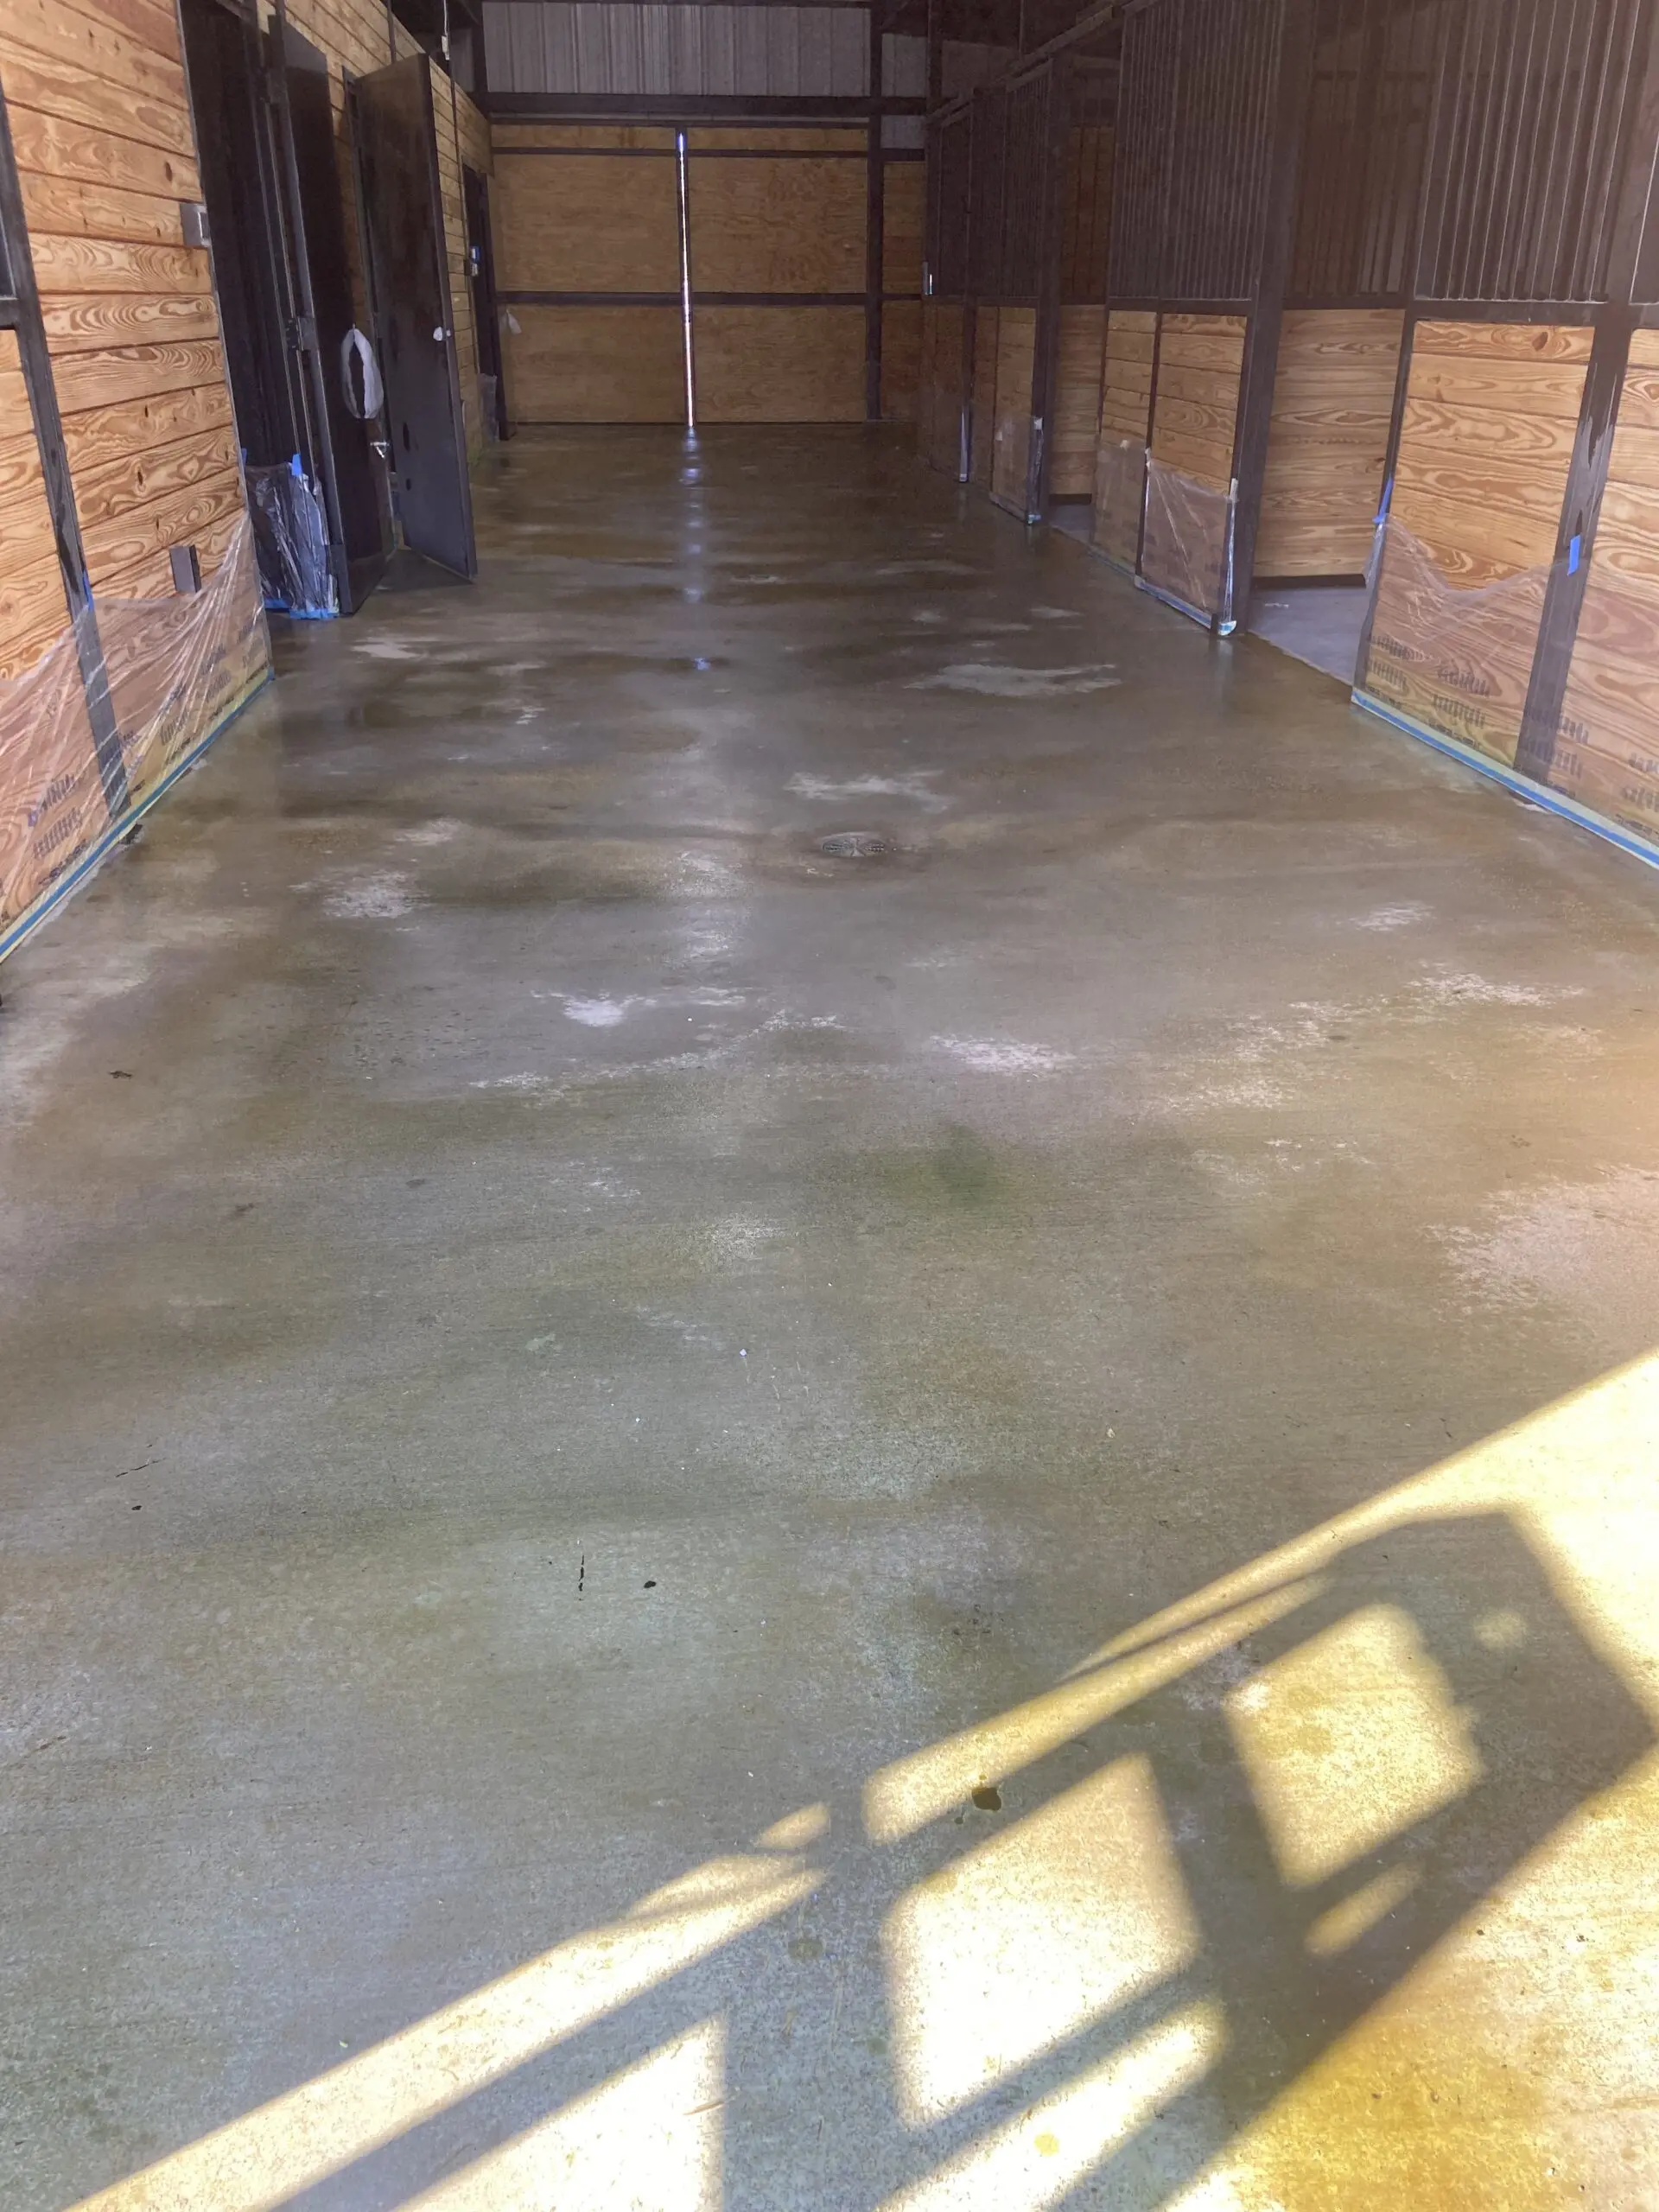 Image showing the cleaned and neutralized stained concrete floor, ready for the next step